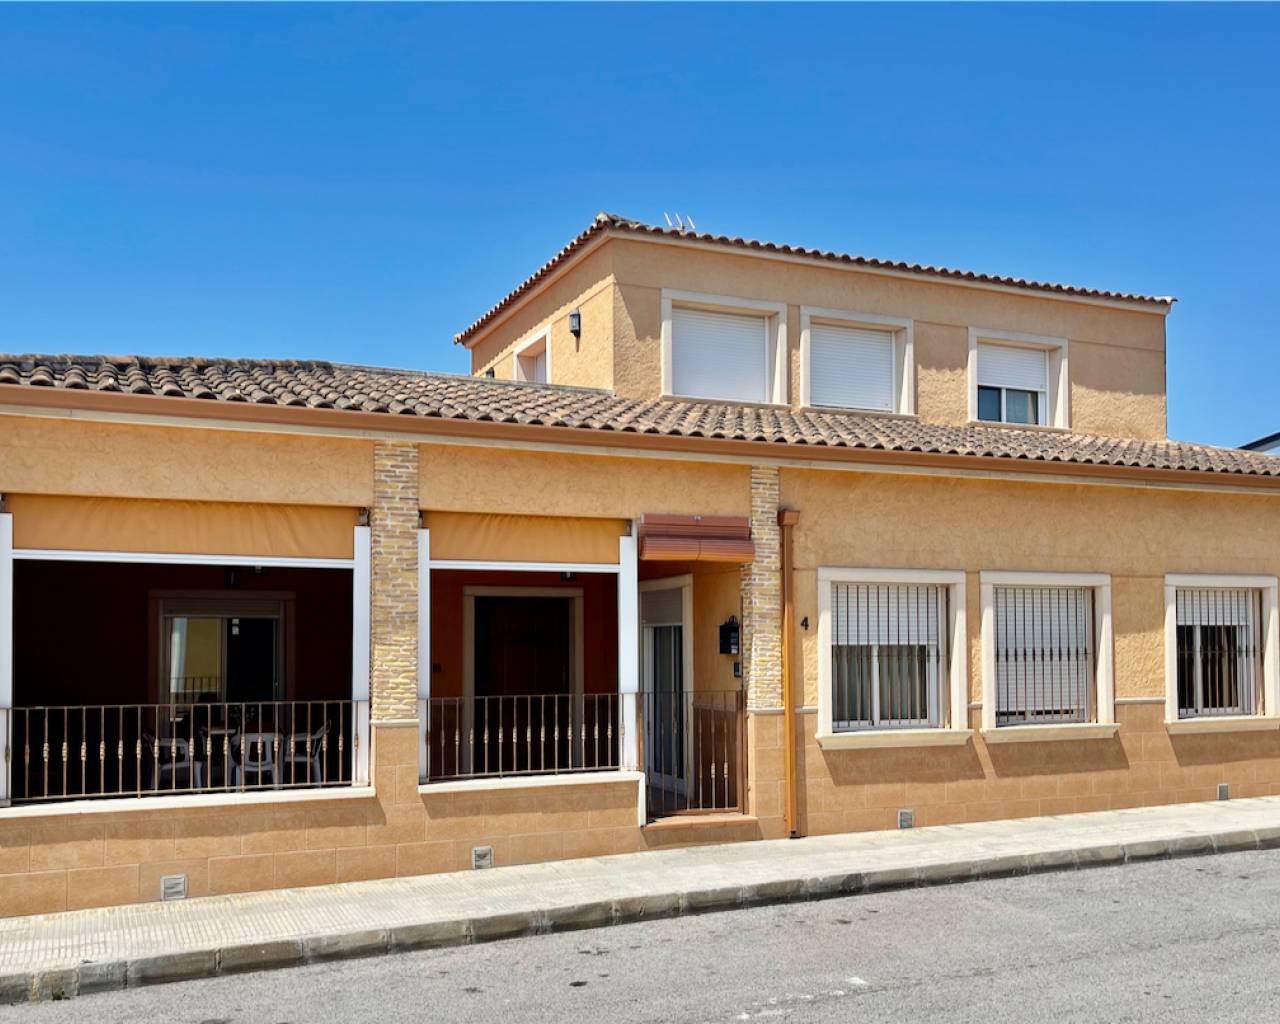 For sale: 5 bedroom house / villa in Catral